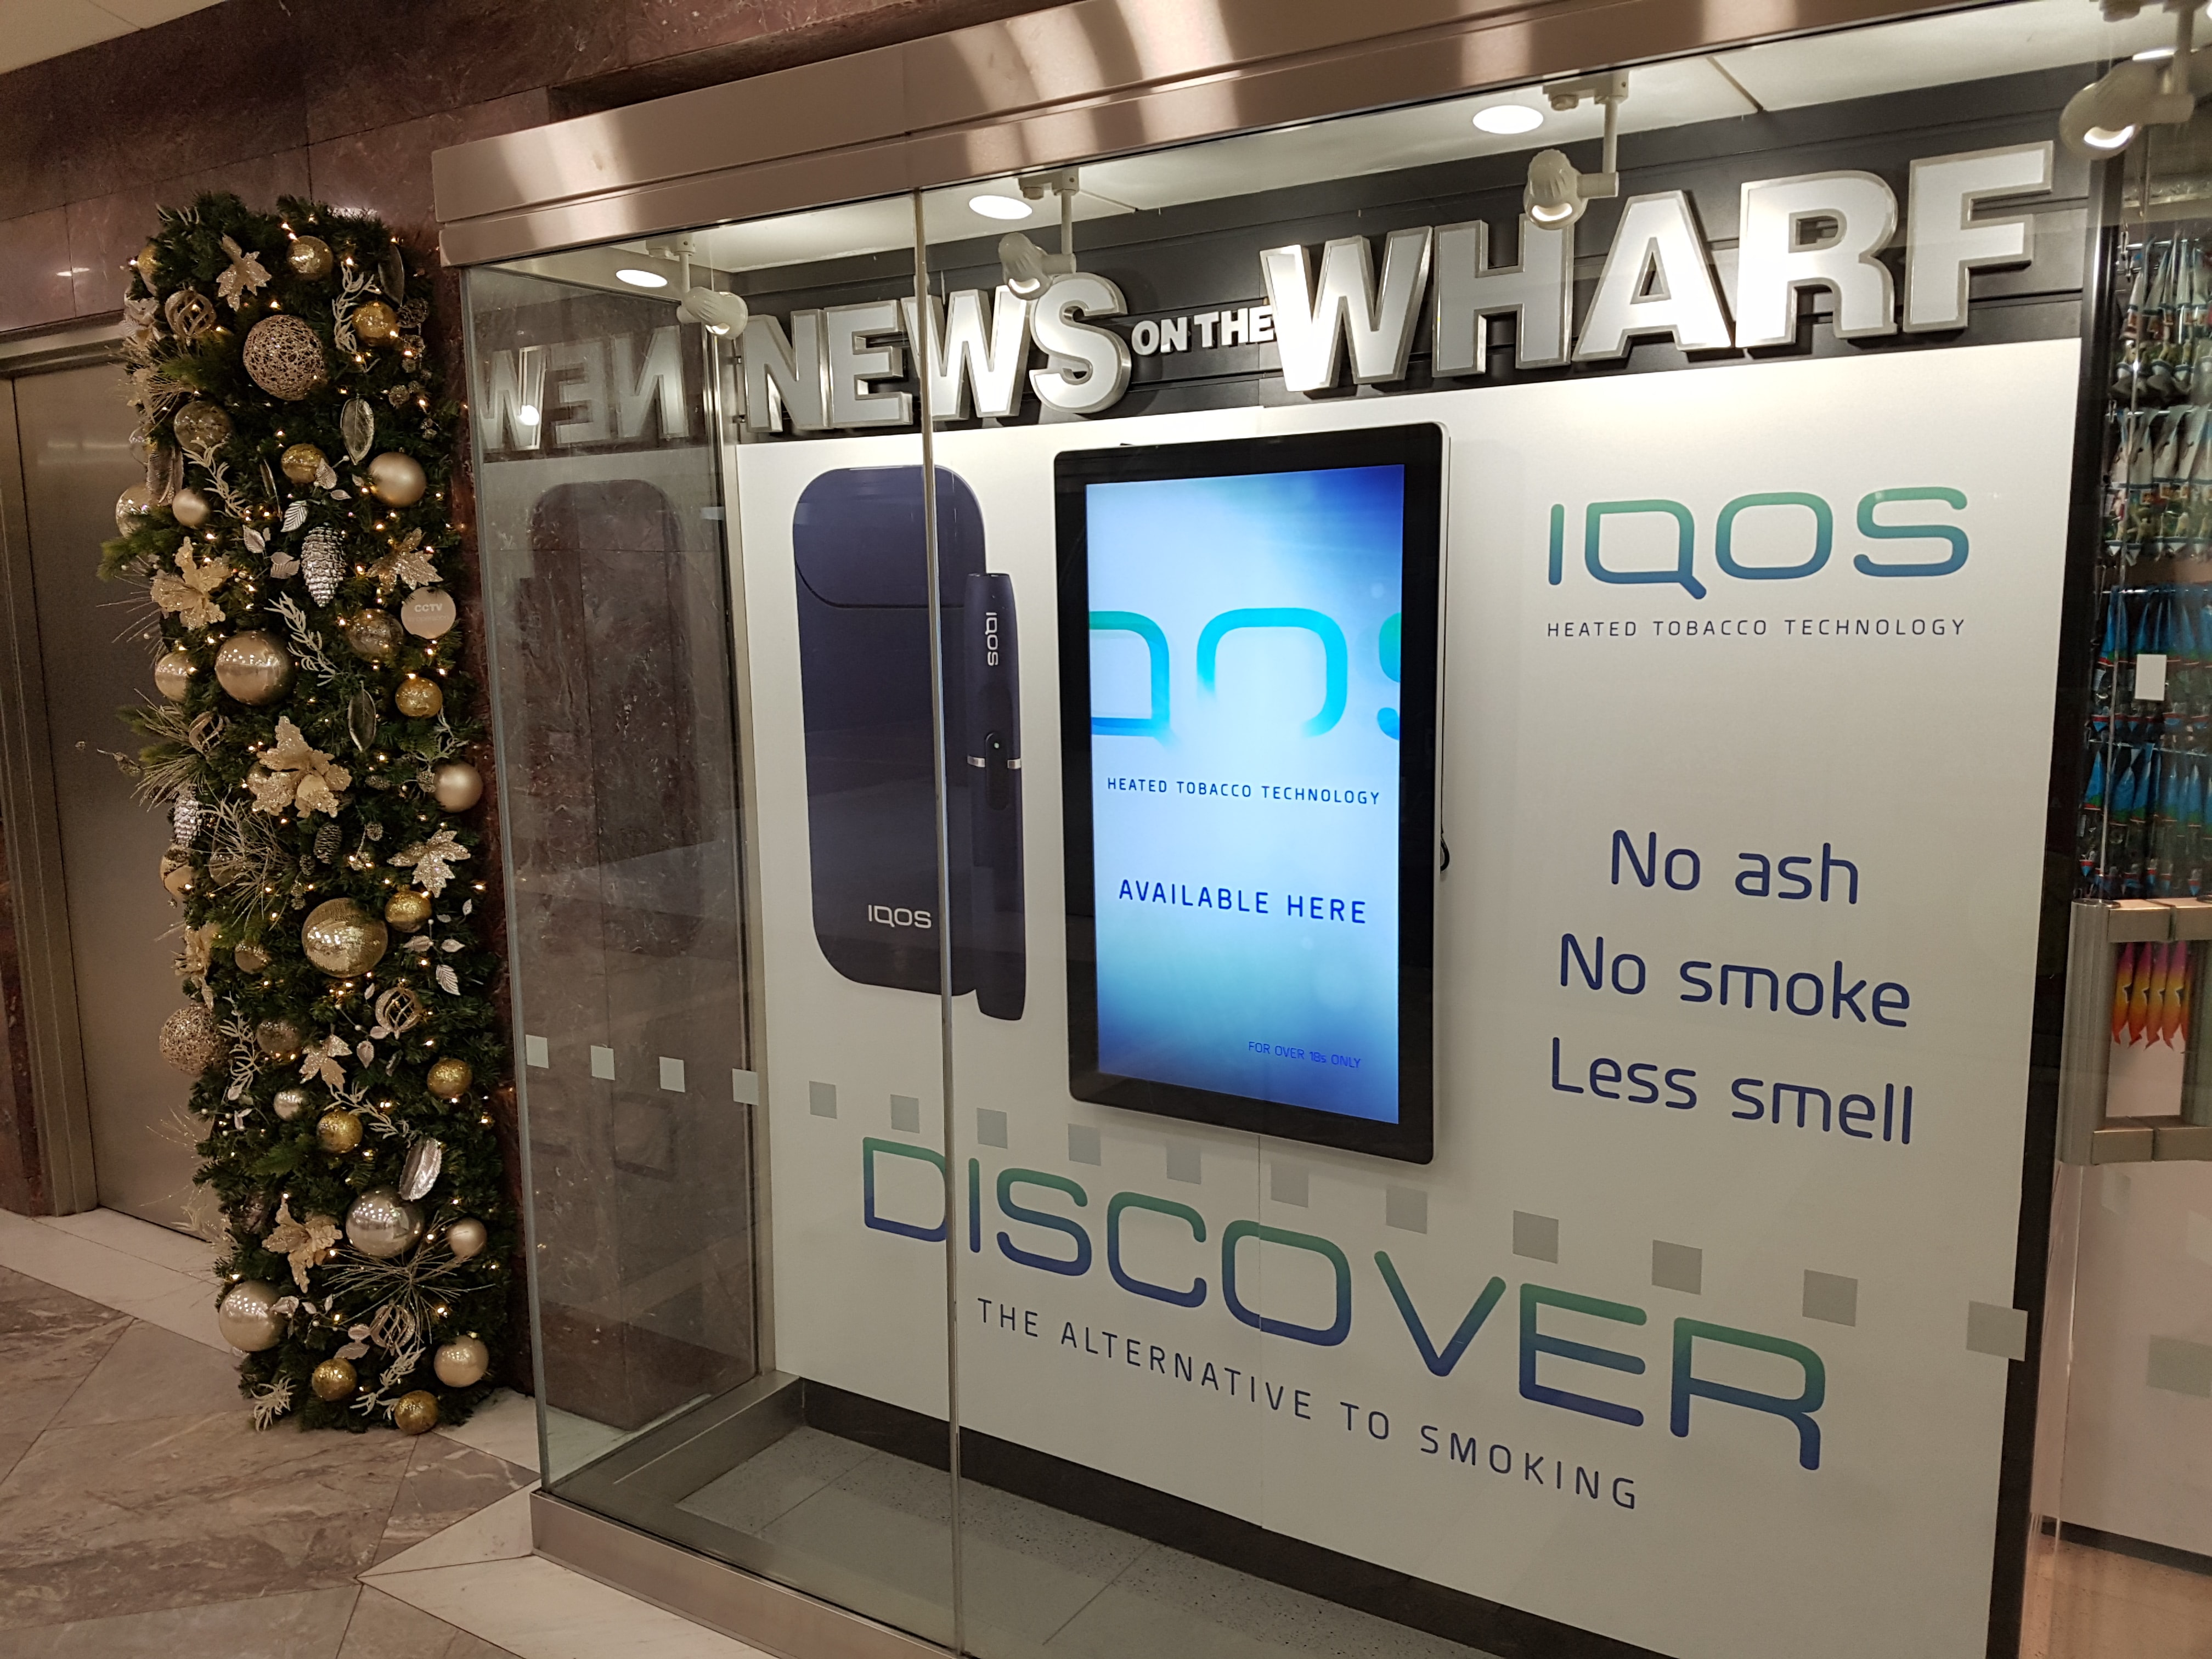 IQOS and NEWS on the WHARF